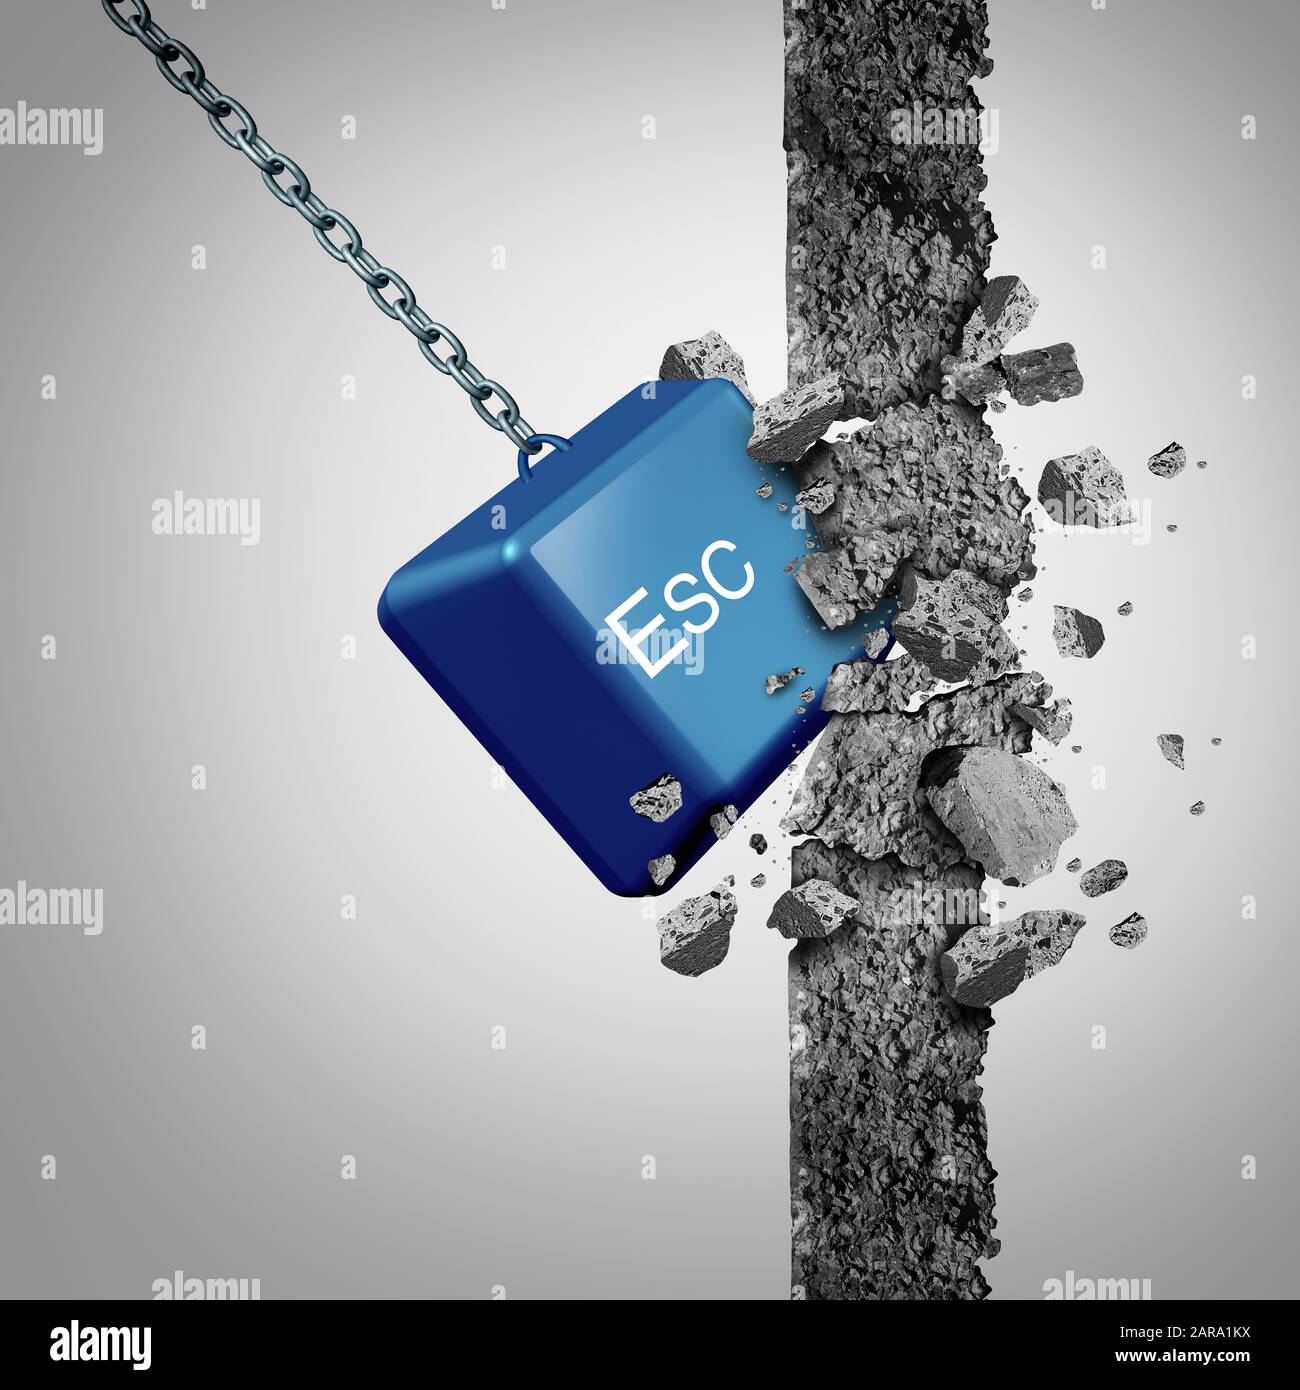 Escape business concept as an Esc computer key button breaking through an obstacle with 3D illustration elements. Stock Photo